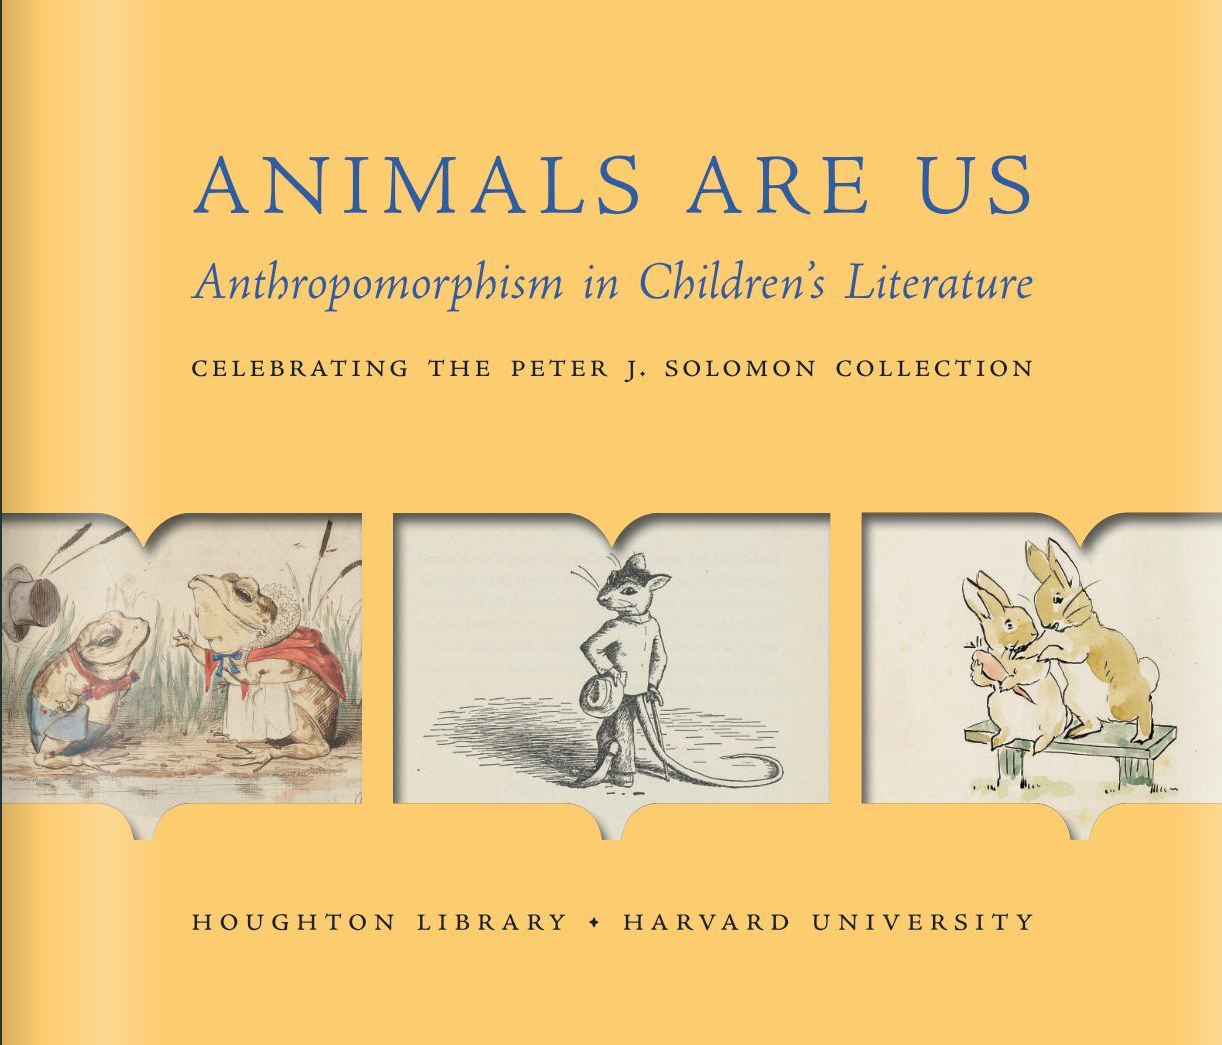 Cover of Animals Are Us exhibition book